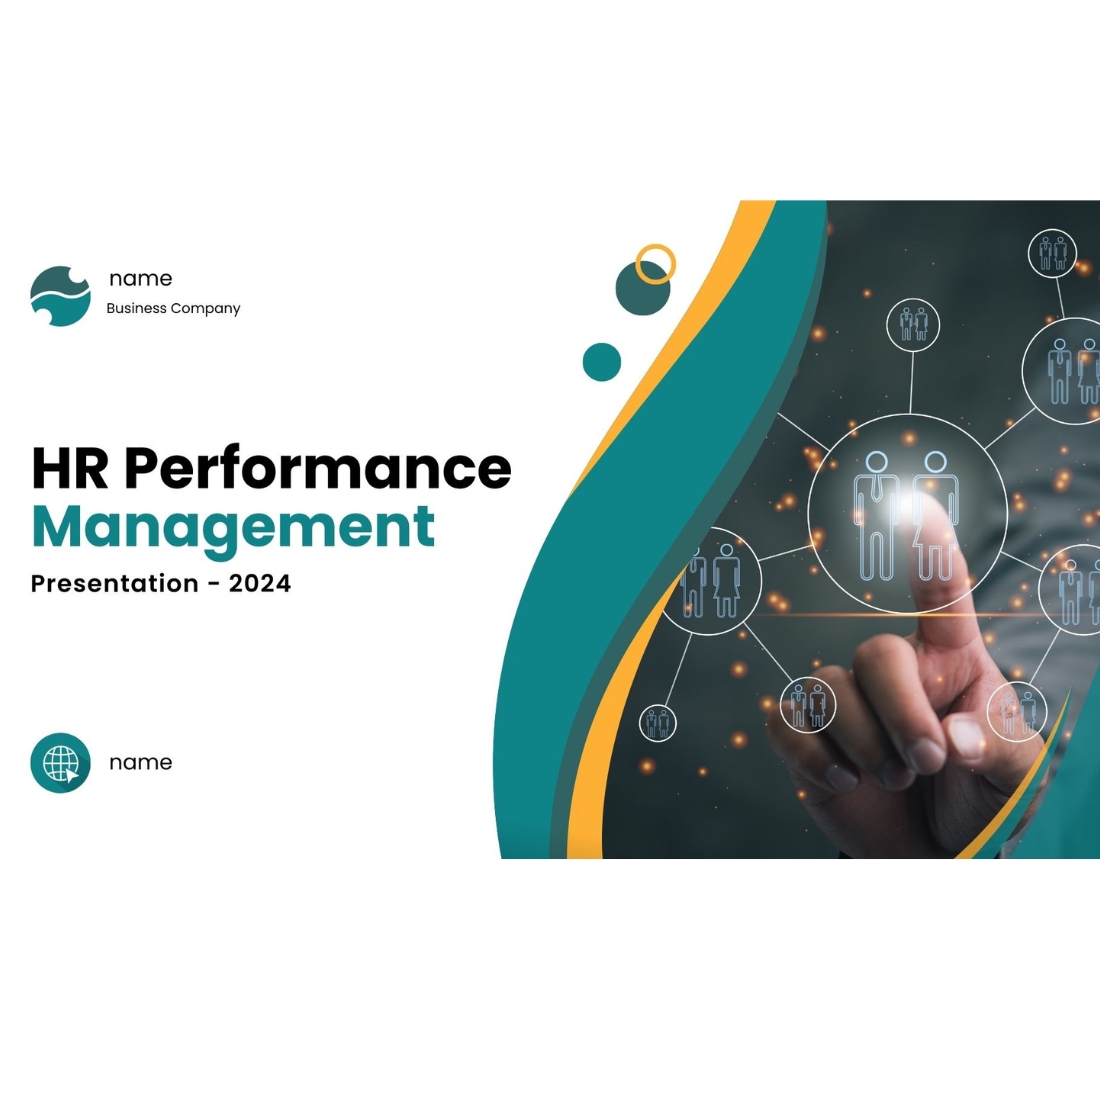 HR Performance Management for 2024 templates cover image.